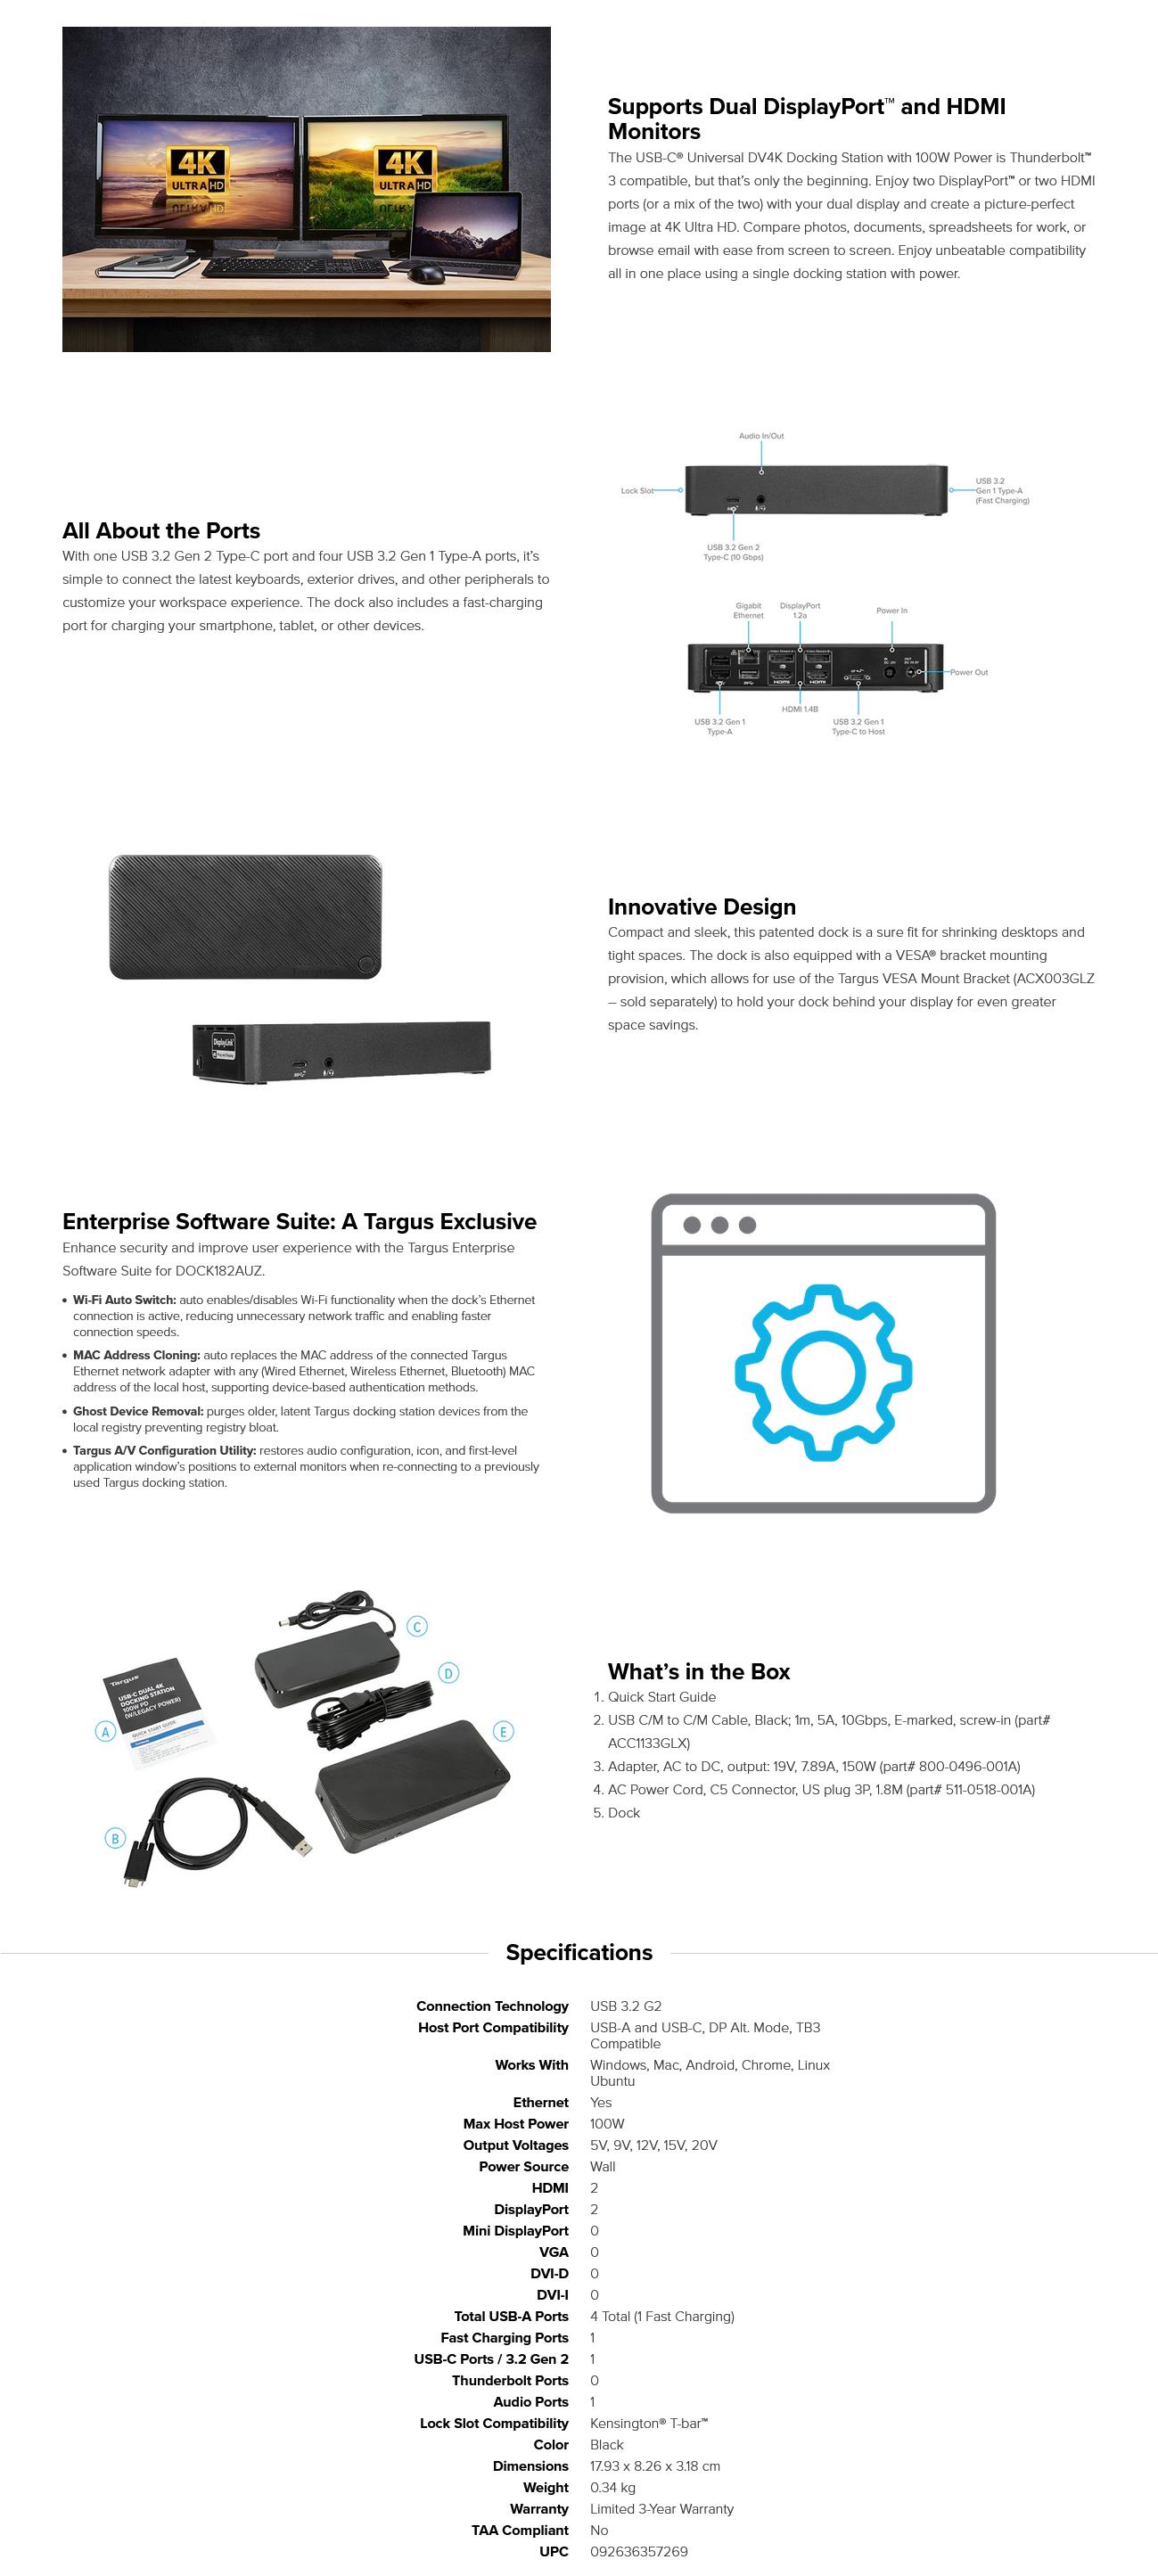 A large marketing image providing additional information about the product Targus USB-C Universal DV4K Docking Station with 100W Power Delivery - Additional alt info not provided